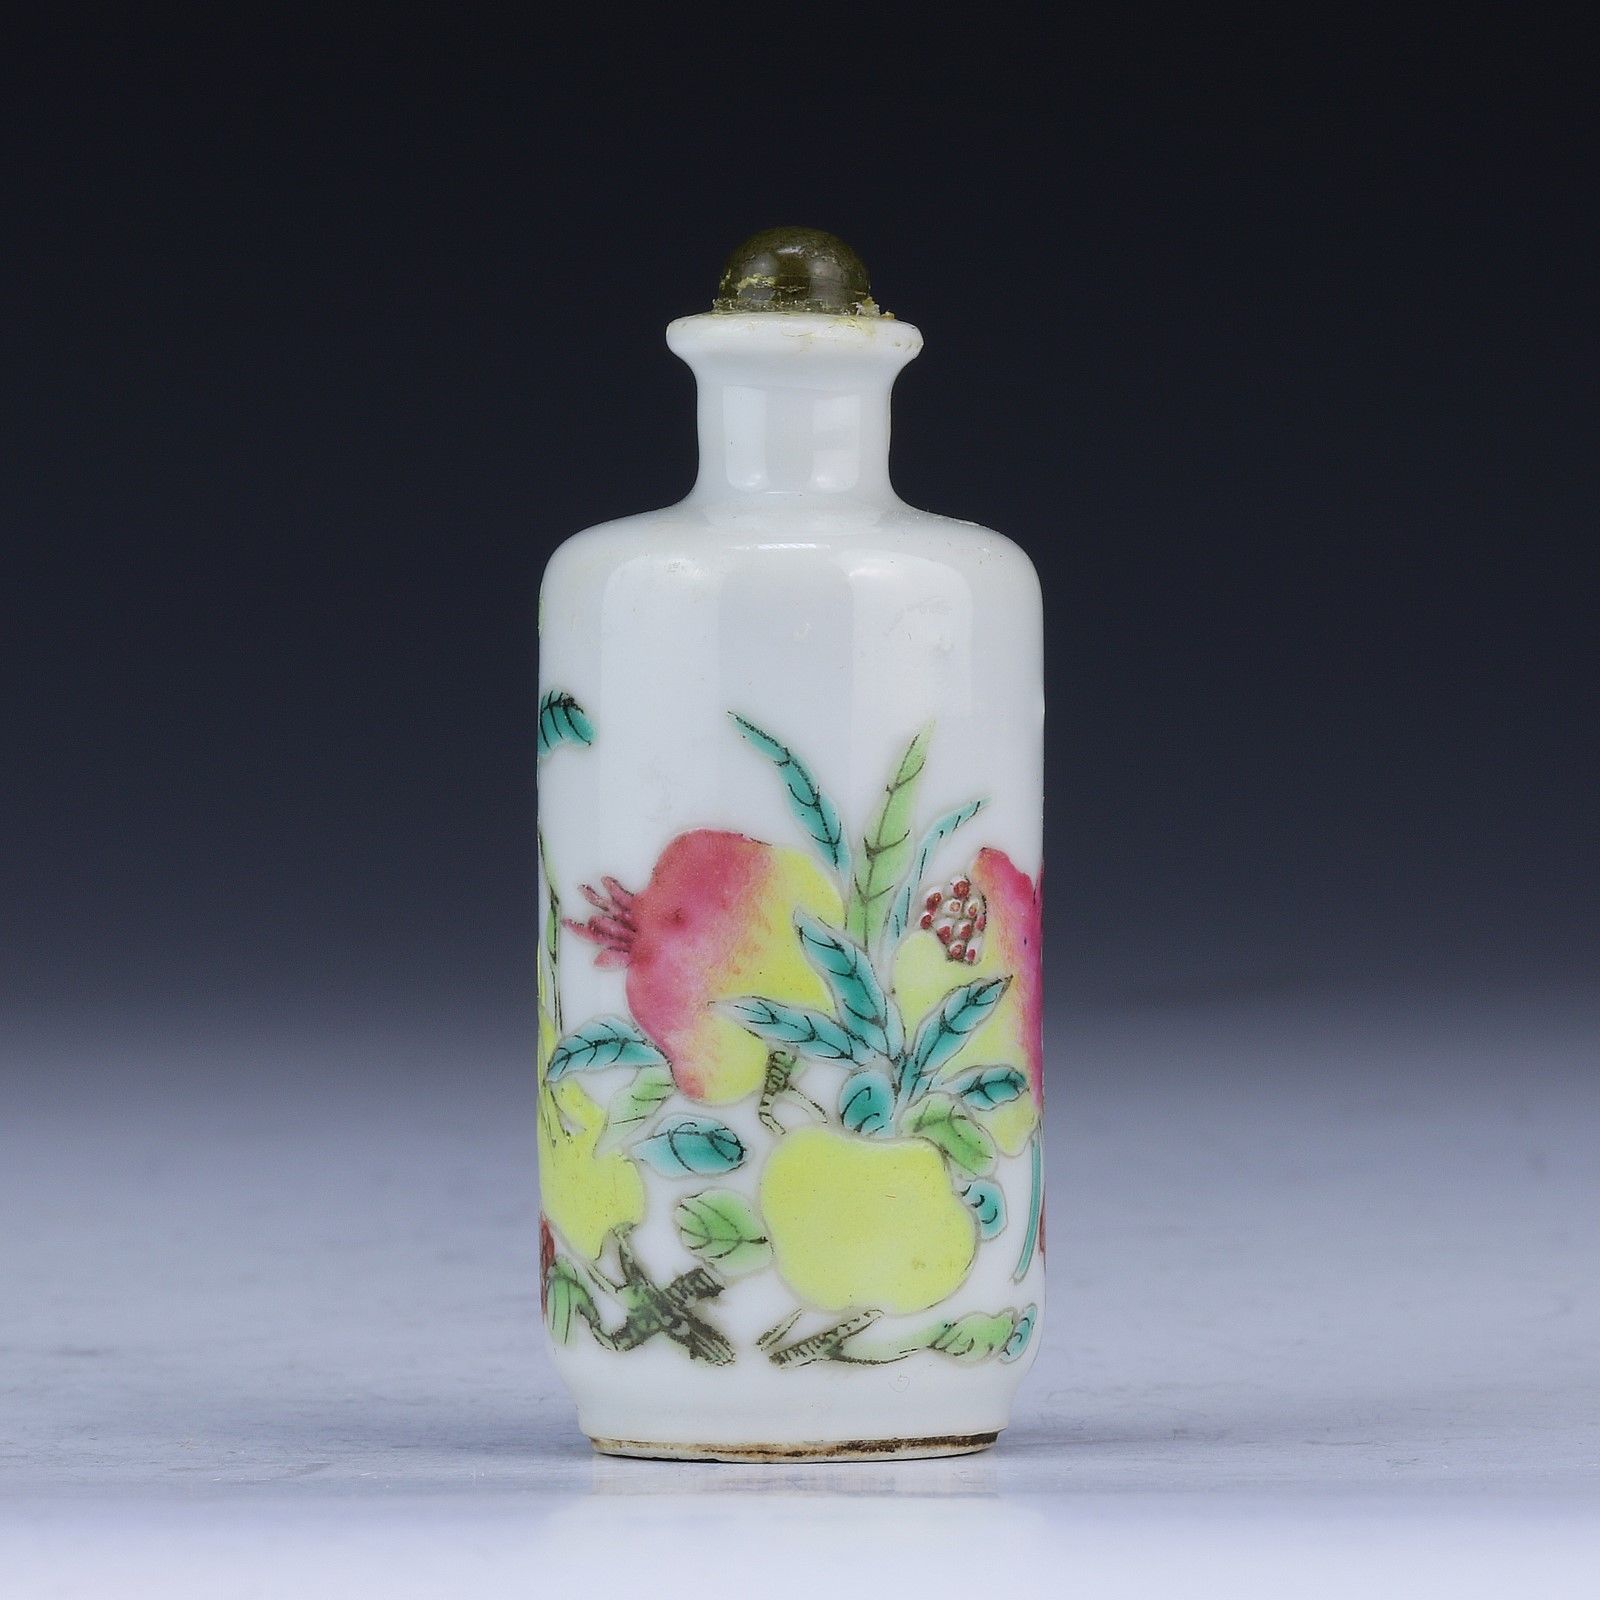 A CHINESE ANTIQUE FAMILLE ROSE PORCELAIN SNUFF BOTTLE